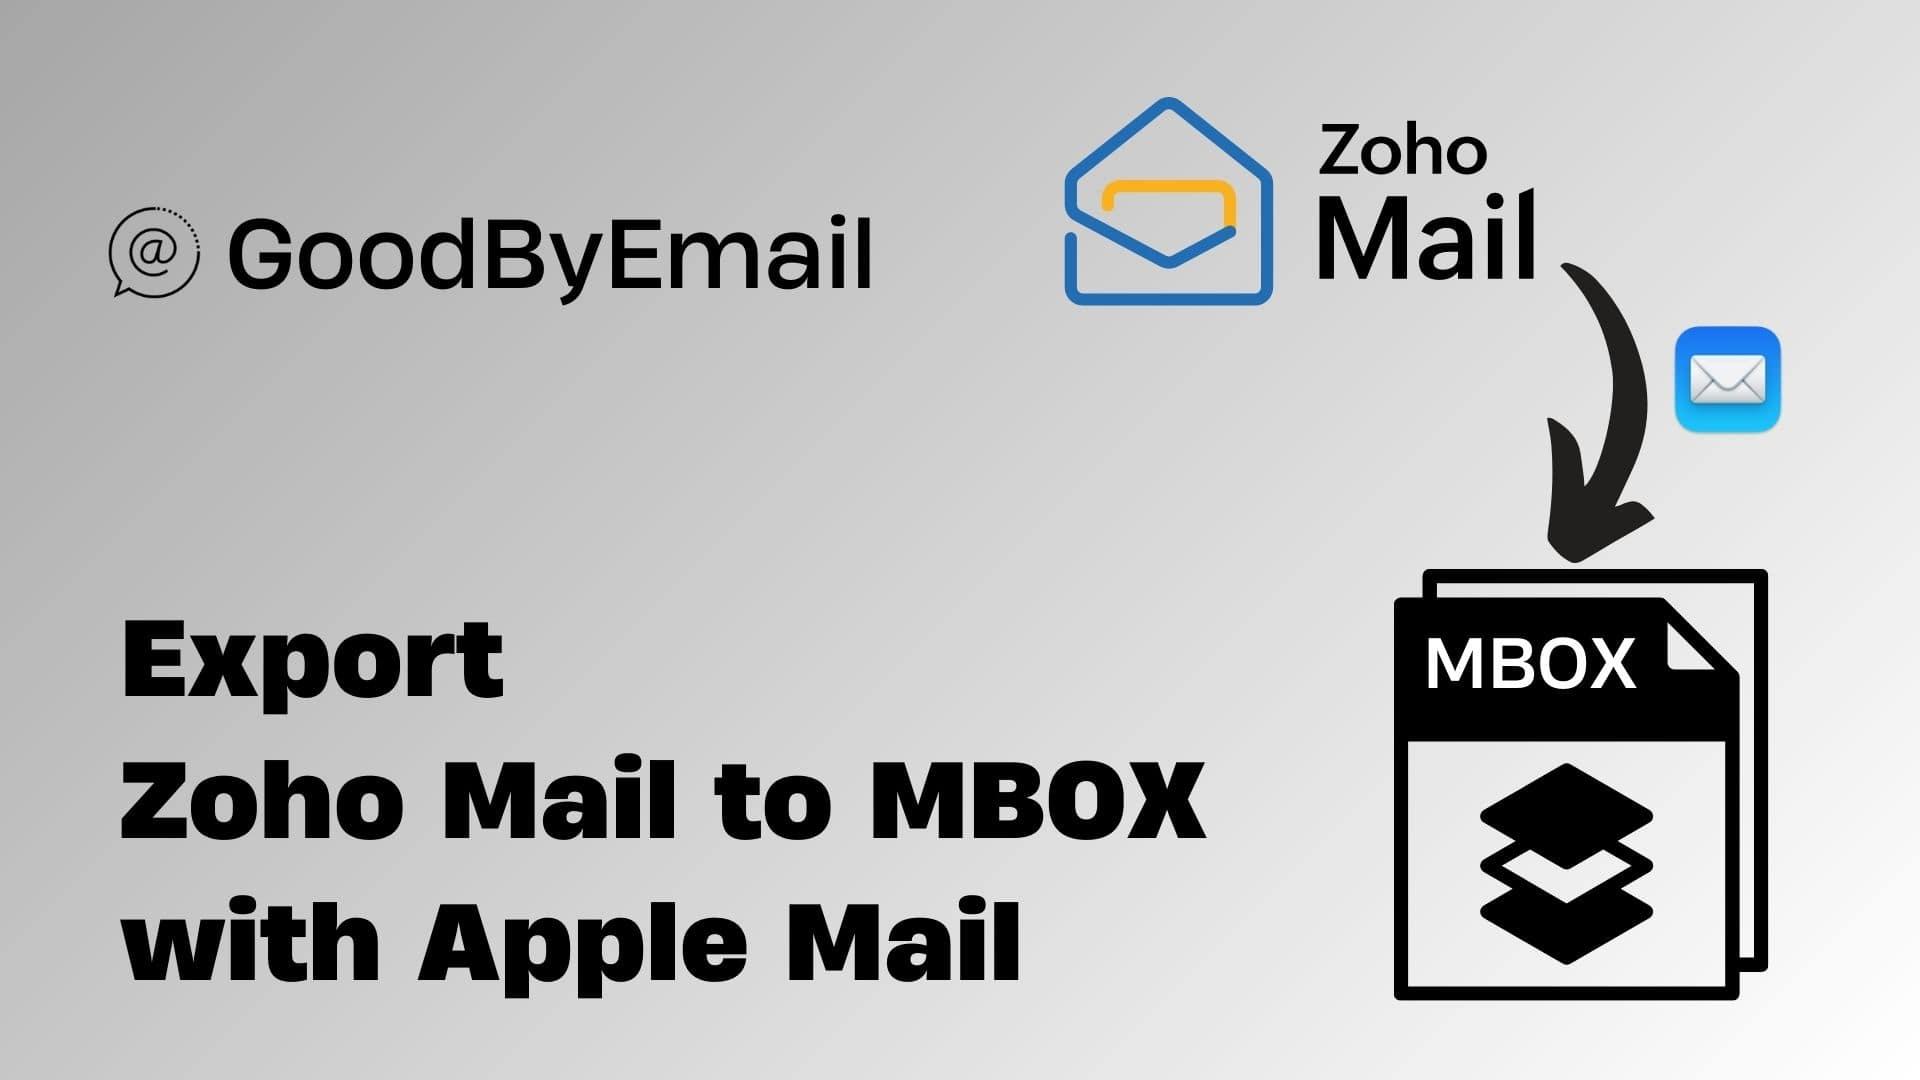 Export zoho to mbox with Apple Mail | GoodByeEmail